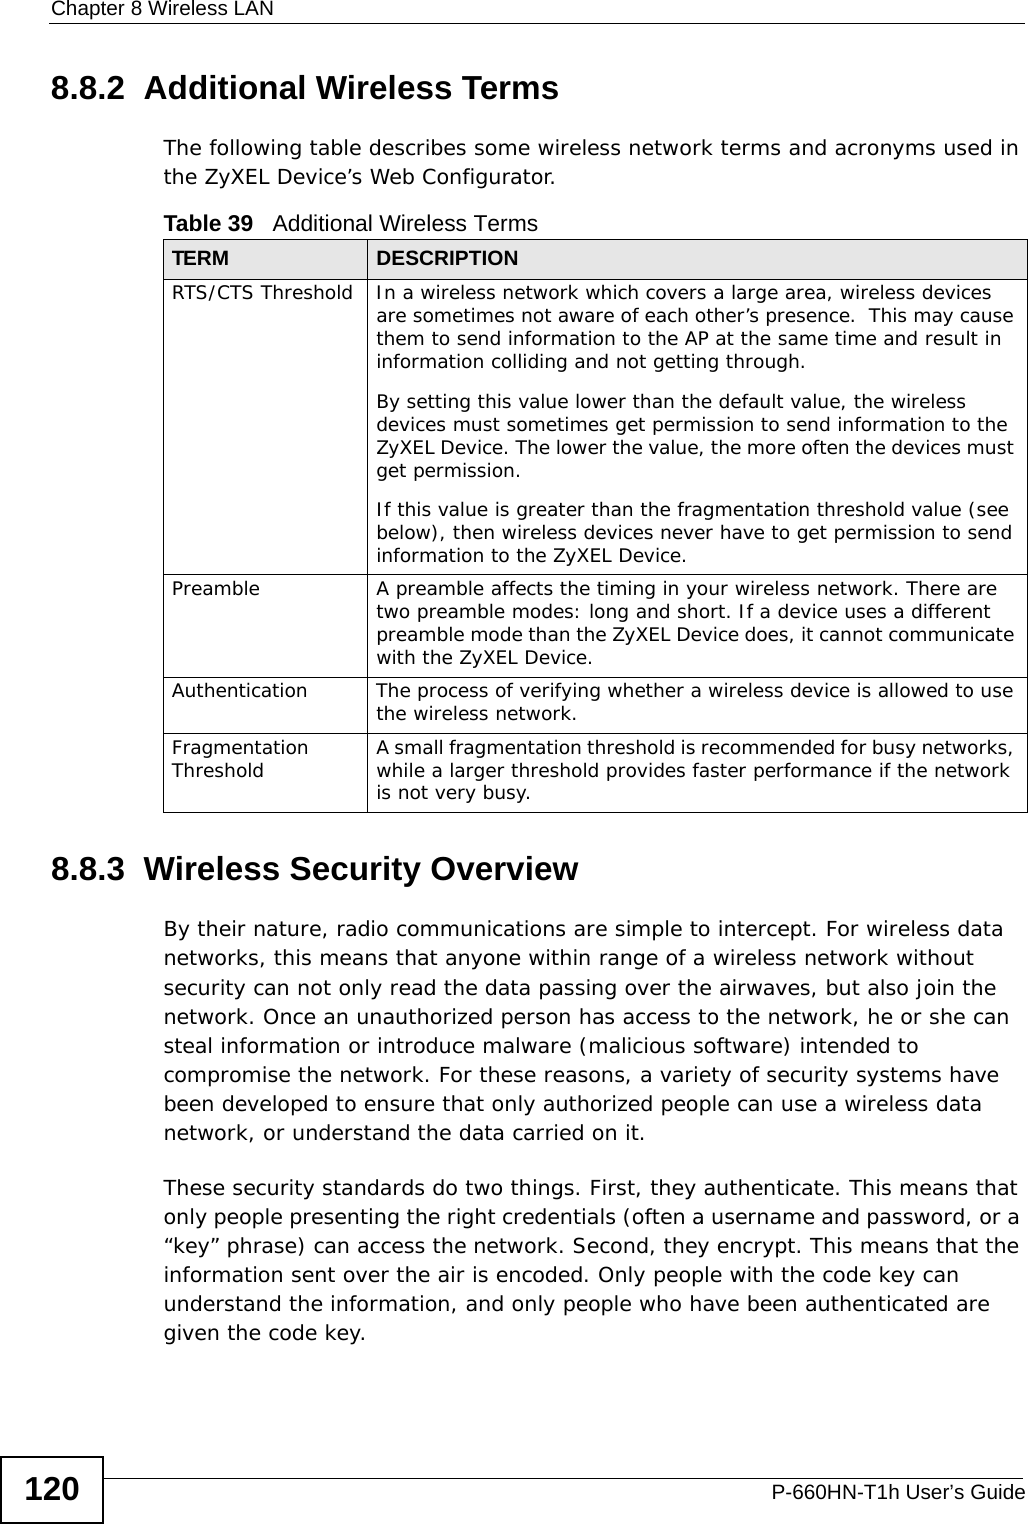 Chapter 8 Wireless LANP-660HN-T1h User’s Guide1208.8.2  Additional Wireless TermsThe following table describes some wireless network terms and acronyms used in the ZyXEL Device’s Web Configurator.8.8.3  Wireless Security OverviewBy their nature, radio communications are simple to intercept. For wireless data networks, this means that anyone within range of a wireless network without security can not only read the data passing over the airwaves, but also join the network. Once an unauthorized person has access to the network, he or she can steal information or introduce malware (malicious software) intended to compromise the network. For these reasons, a variety of security systems have been developed to ensure that only authorized people can use a wireless data network, or understand the data carried on it.These security standards do two things. First, they authenticate. This means that only people presenting the right credentials (often a username and password, or a “key” phrase) can access the network. Second, they encrypt. This means that the information sent over the air is encoded. Only people with the code key can understand the information, and only people who have been authenticated are given the code key.Table 39   Additional Wireless TermsTERM DESCRIPTIONRTS/CTS Threshold In a wireless network which covers a large area, wireless devices are sometimes not aware of each other’s presence.  This may cause them to send information to the AP at the same time and result in information colliding and not getting through.By setting this value lower than the default value, the wireless devices must sometimes get permission to send information to the ZyXEL Device. The lower the value, the more often the devices must get permission.If this value is greater than the fragmentation threshold value (see below), then wireless devices never have to get permission to send information to the ZyXEL Device.Preamble A preamble affects the timing in your wireless network. There are two preamble modes: long and short. If a device uses a different preamble mode than the ZyXEL Device does, it cannot communicate with the ZyXEL Device.Authentication The process of verifying whether a wireless device is allowed to use the wireless network.Fragmentation Threshold A small fragmentation threshold is recommended for busy networks, while a larger threshold provides faster performance if the network is not very busy.